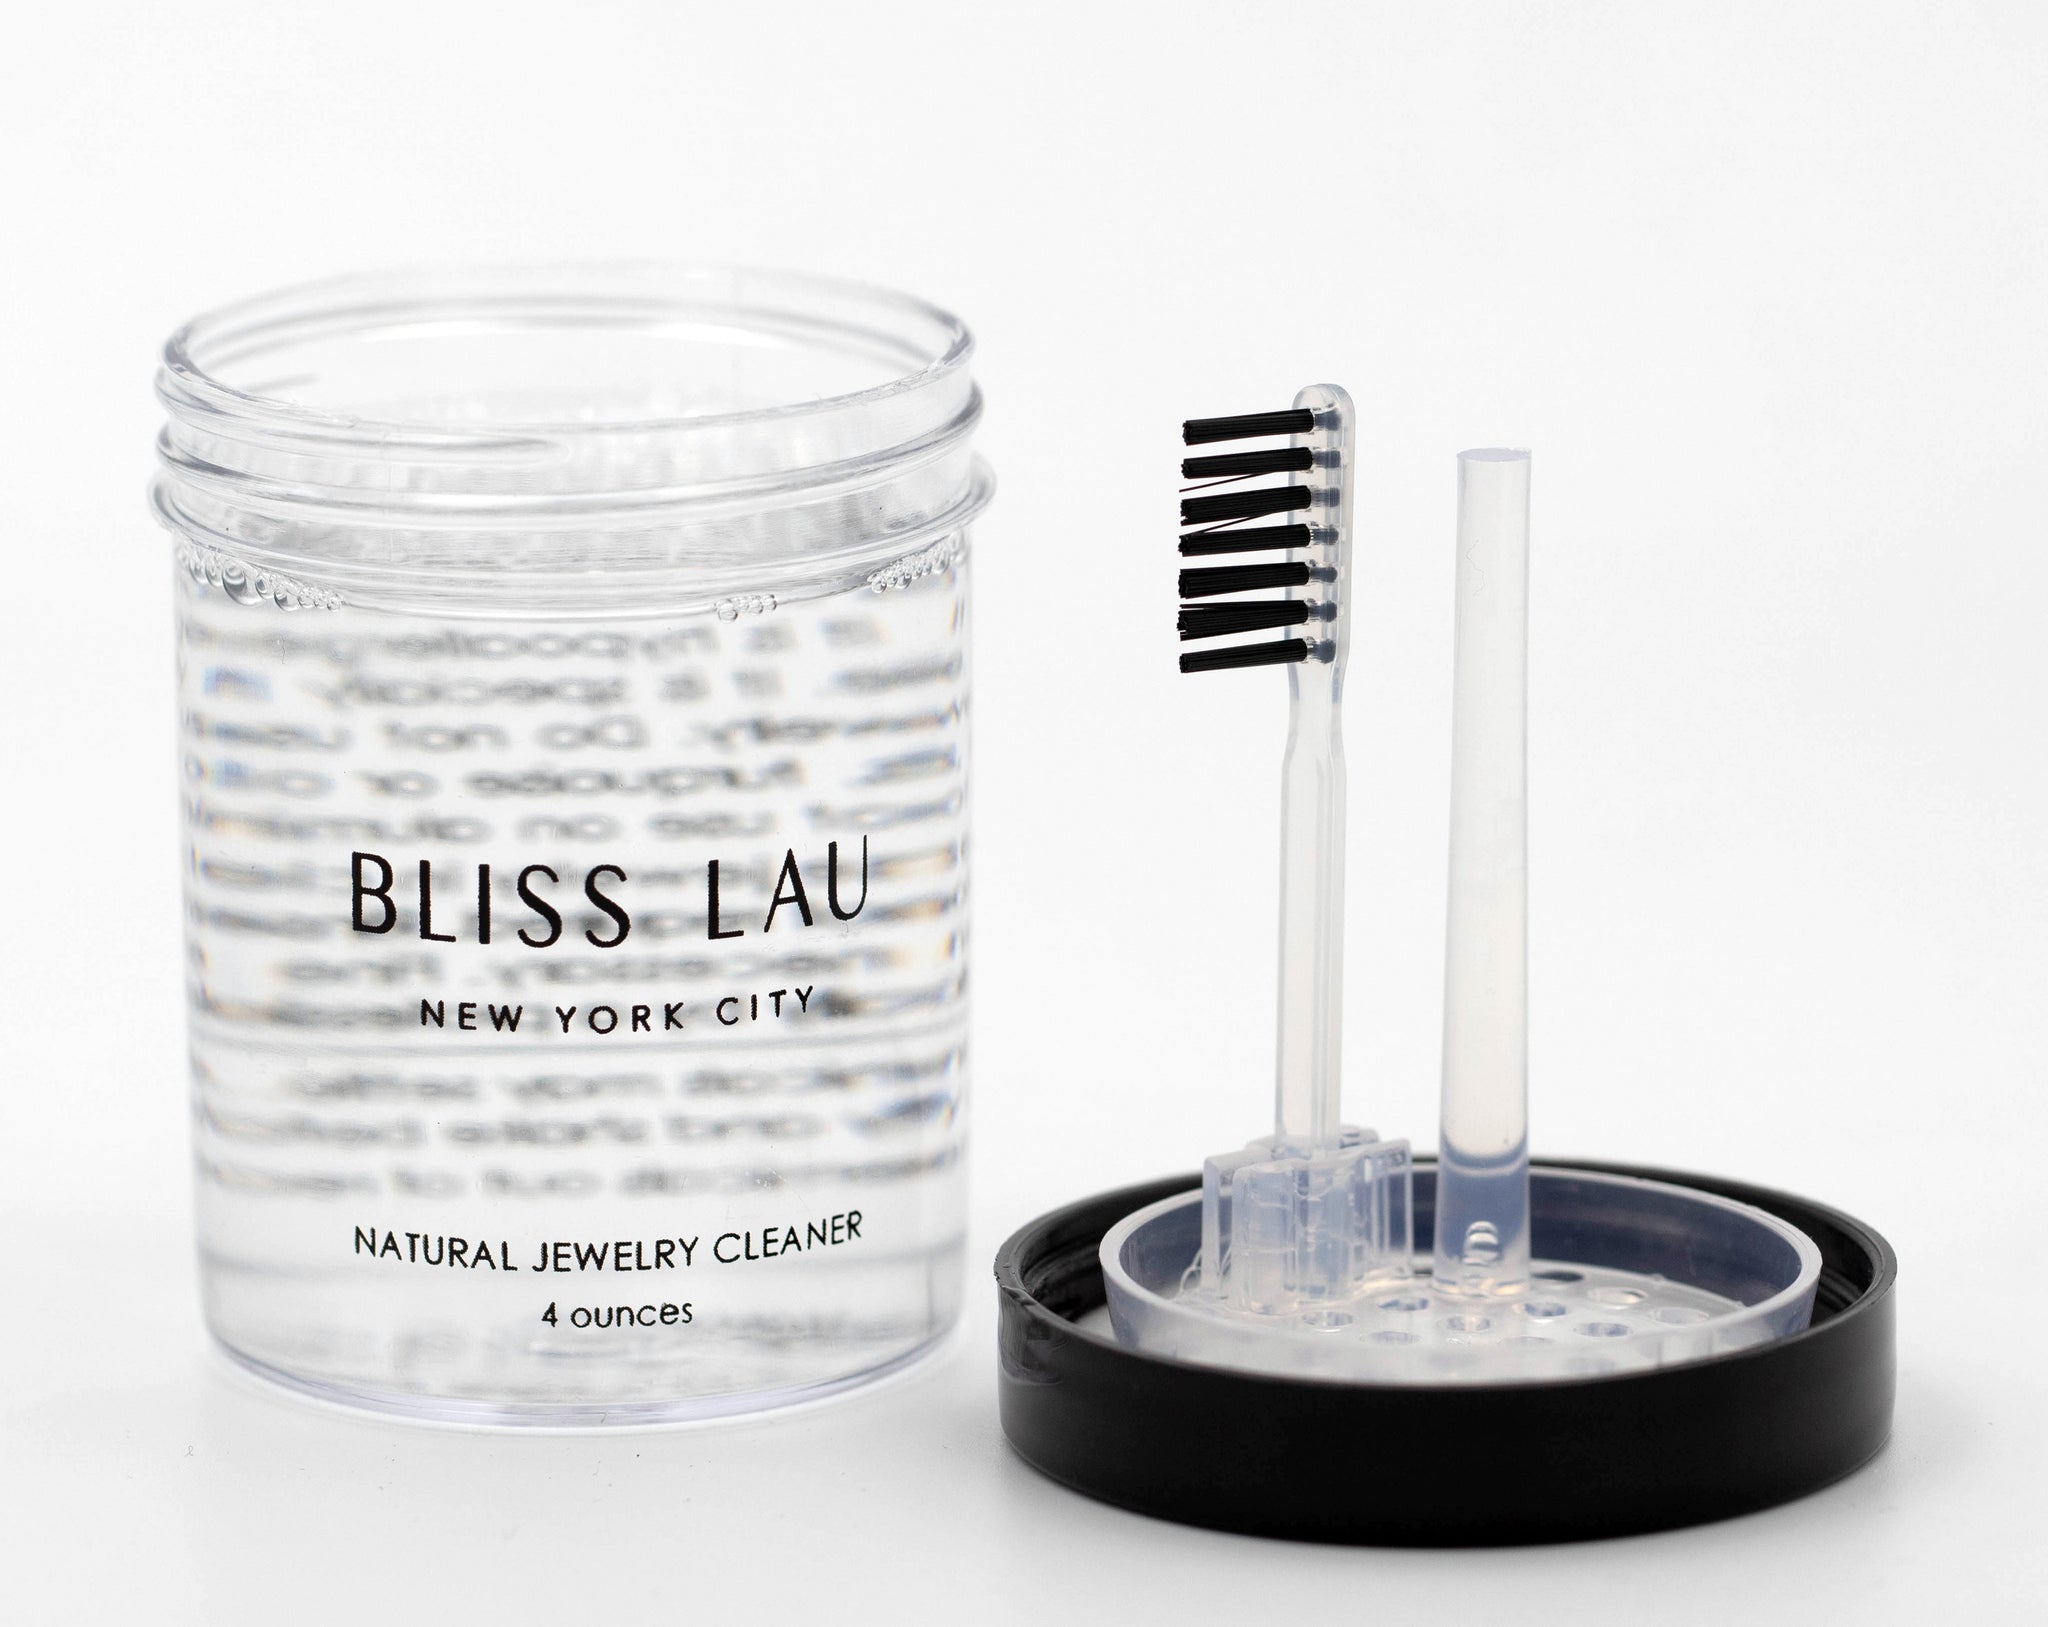 jewelry cleaner by Bliss Lau